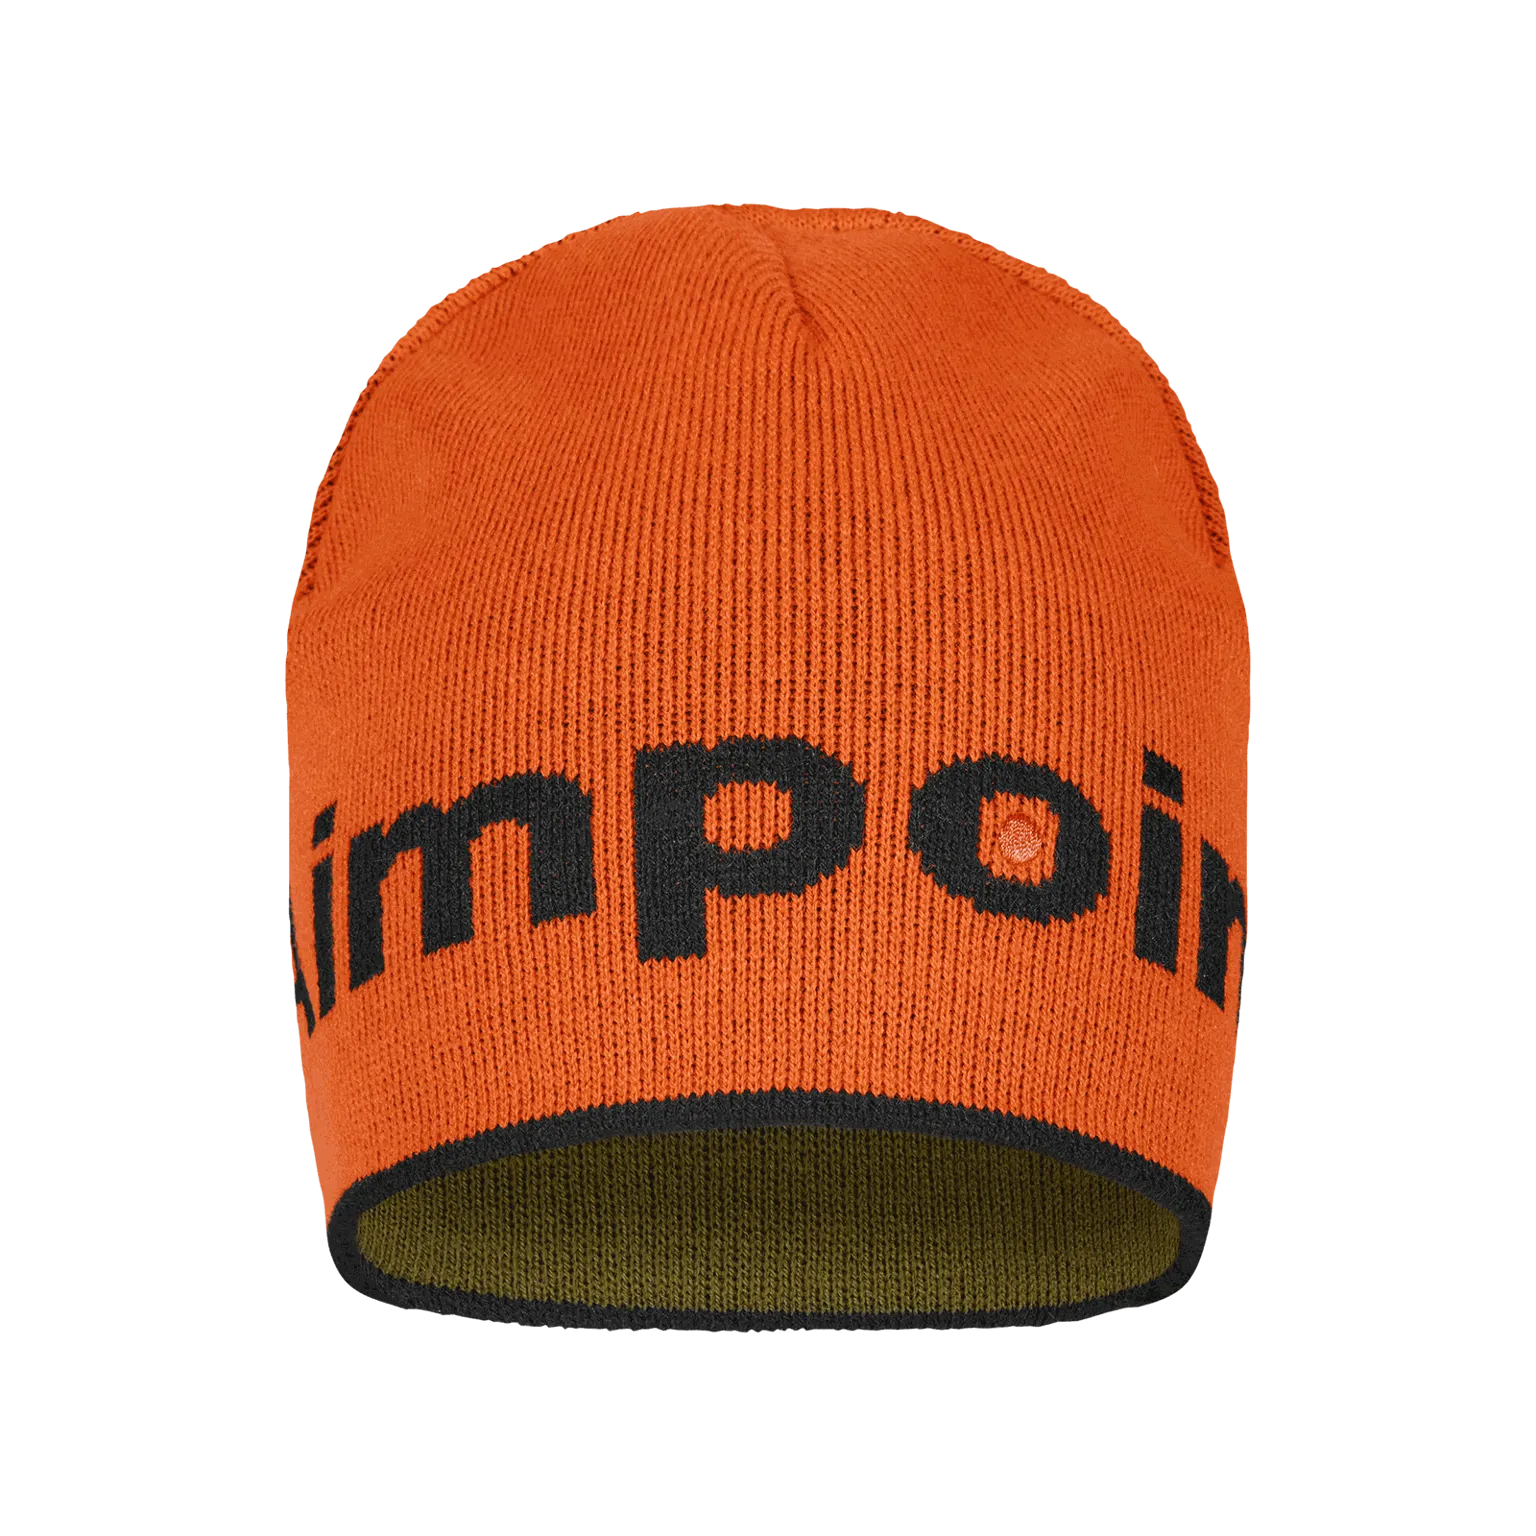 Aimpoint® Beanie - Knitted Orange and green reversible warm hat  - 3